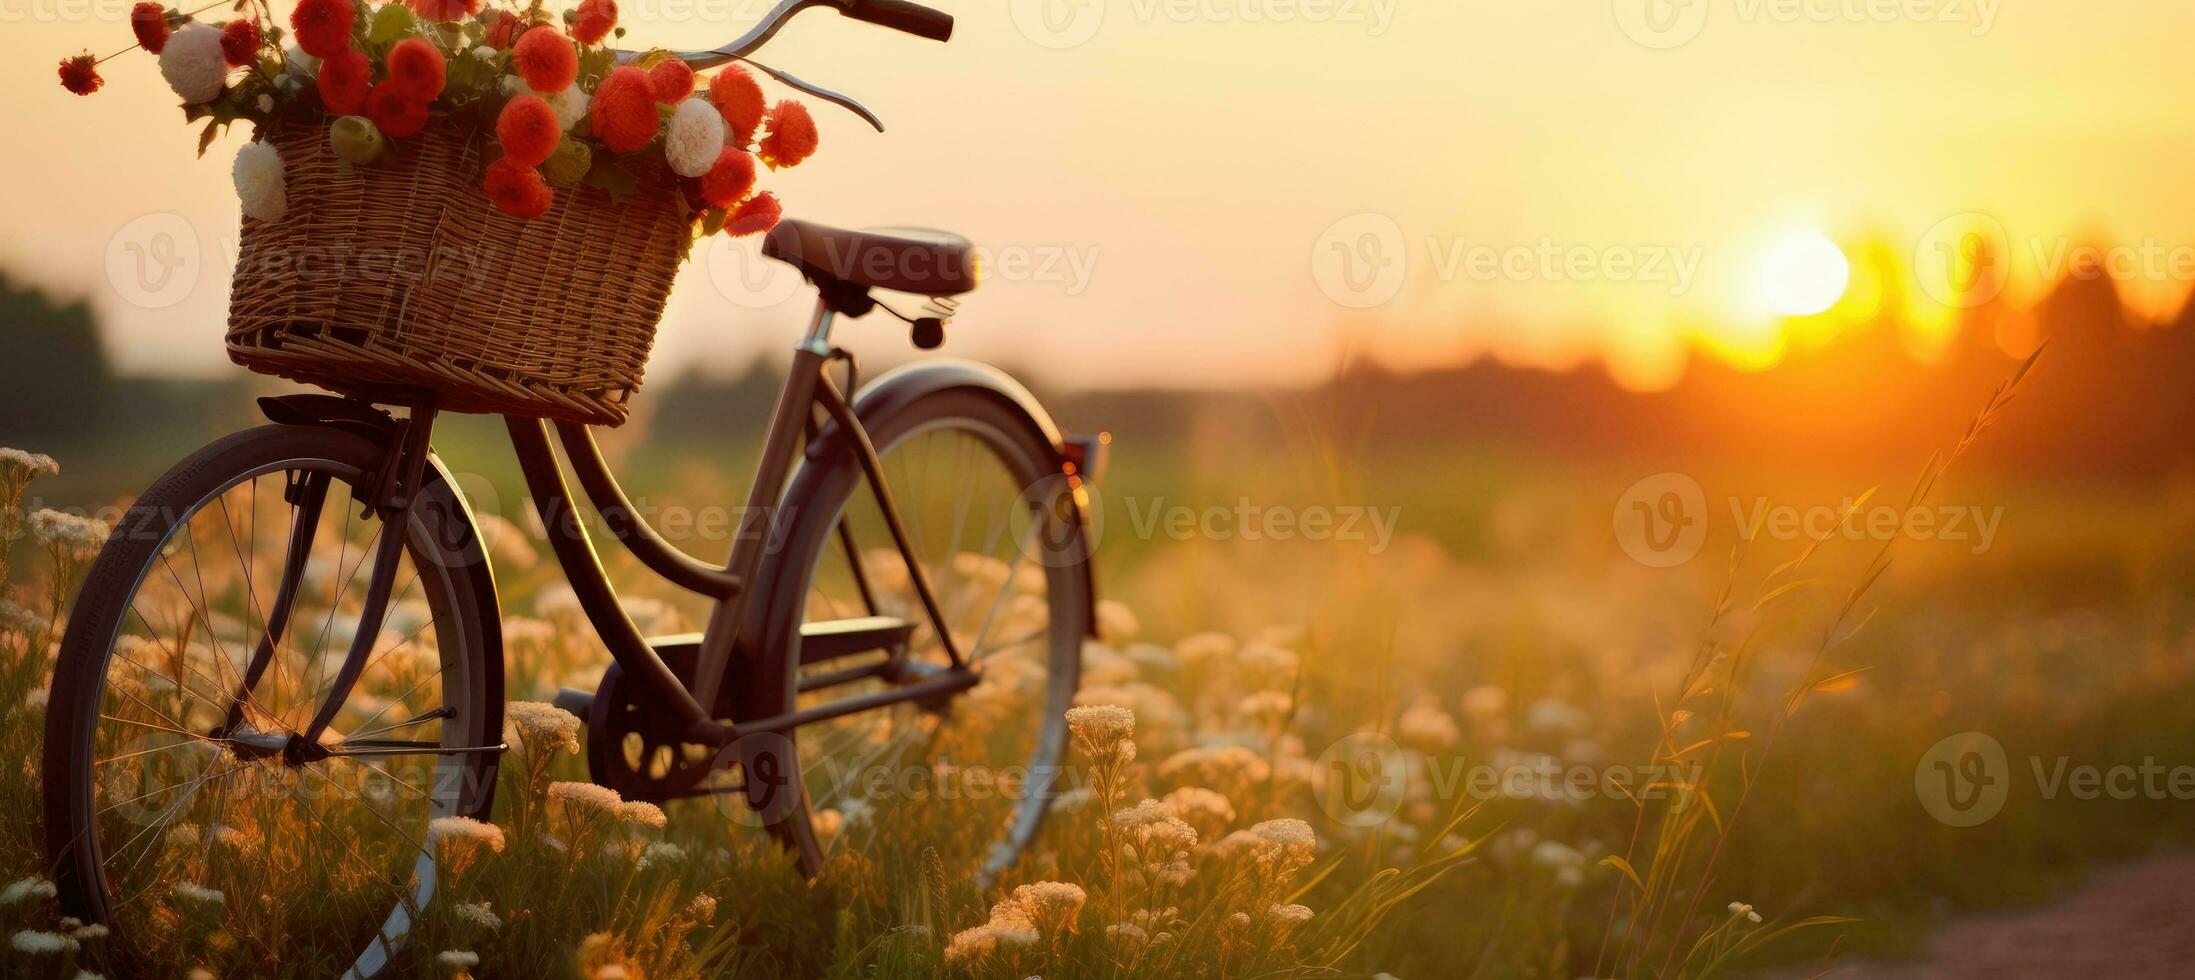 A vintage bicycle leaning in grass filed in sunset, Wicker basket with flowers on the bike photo